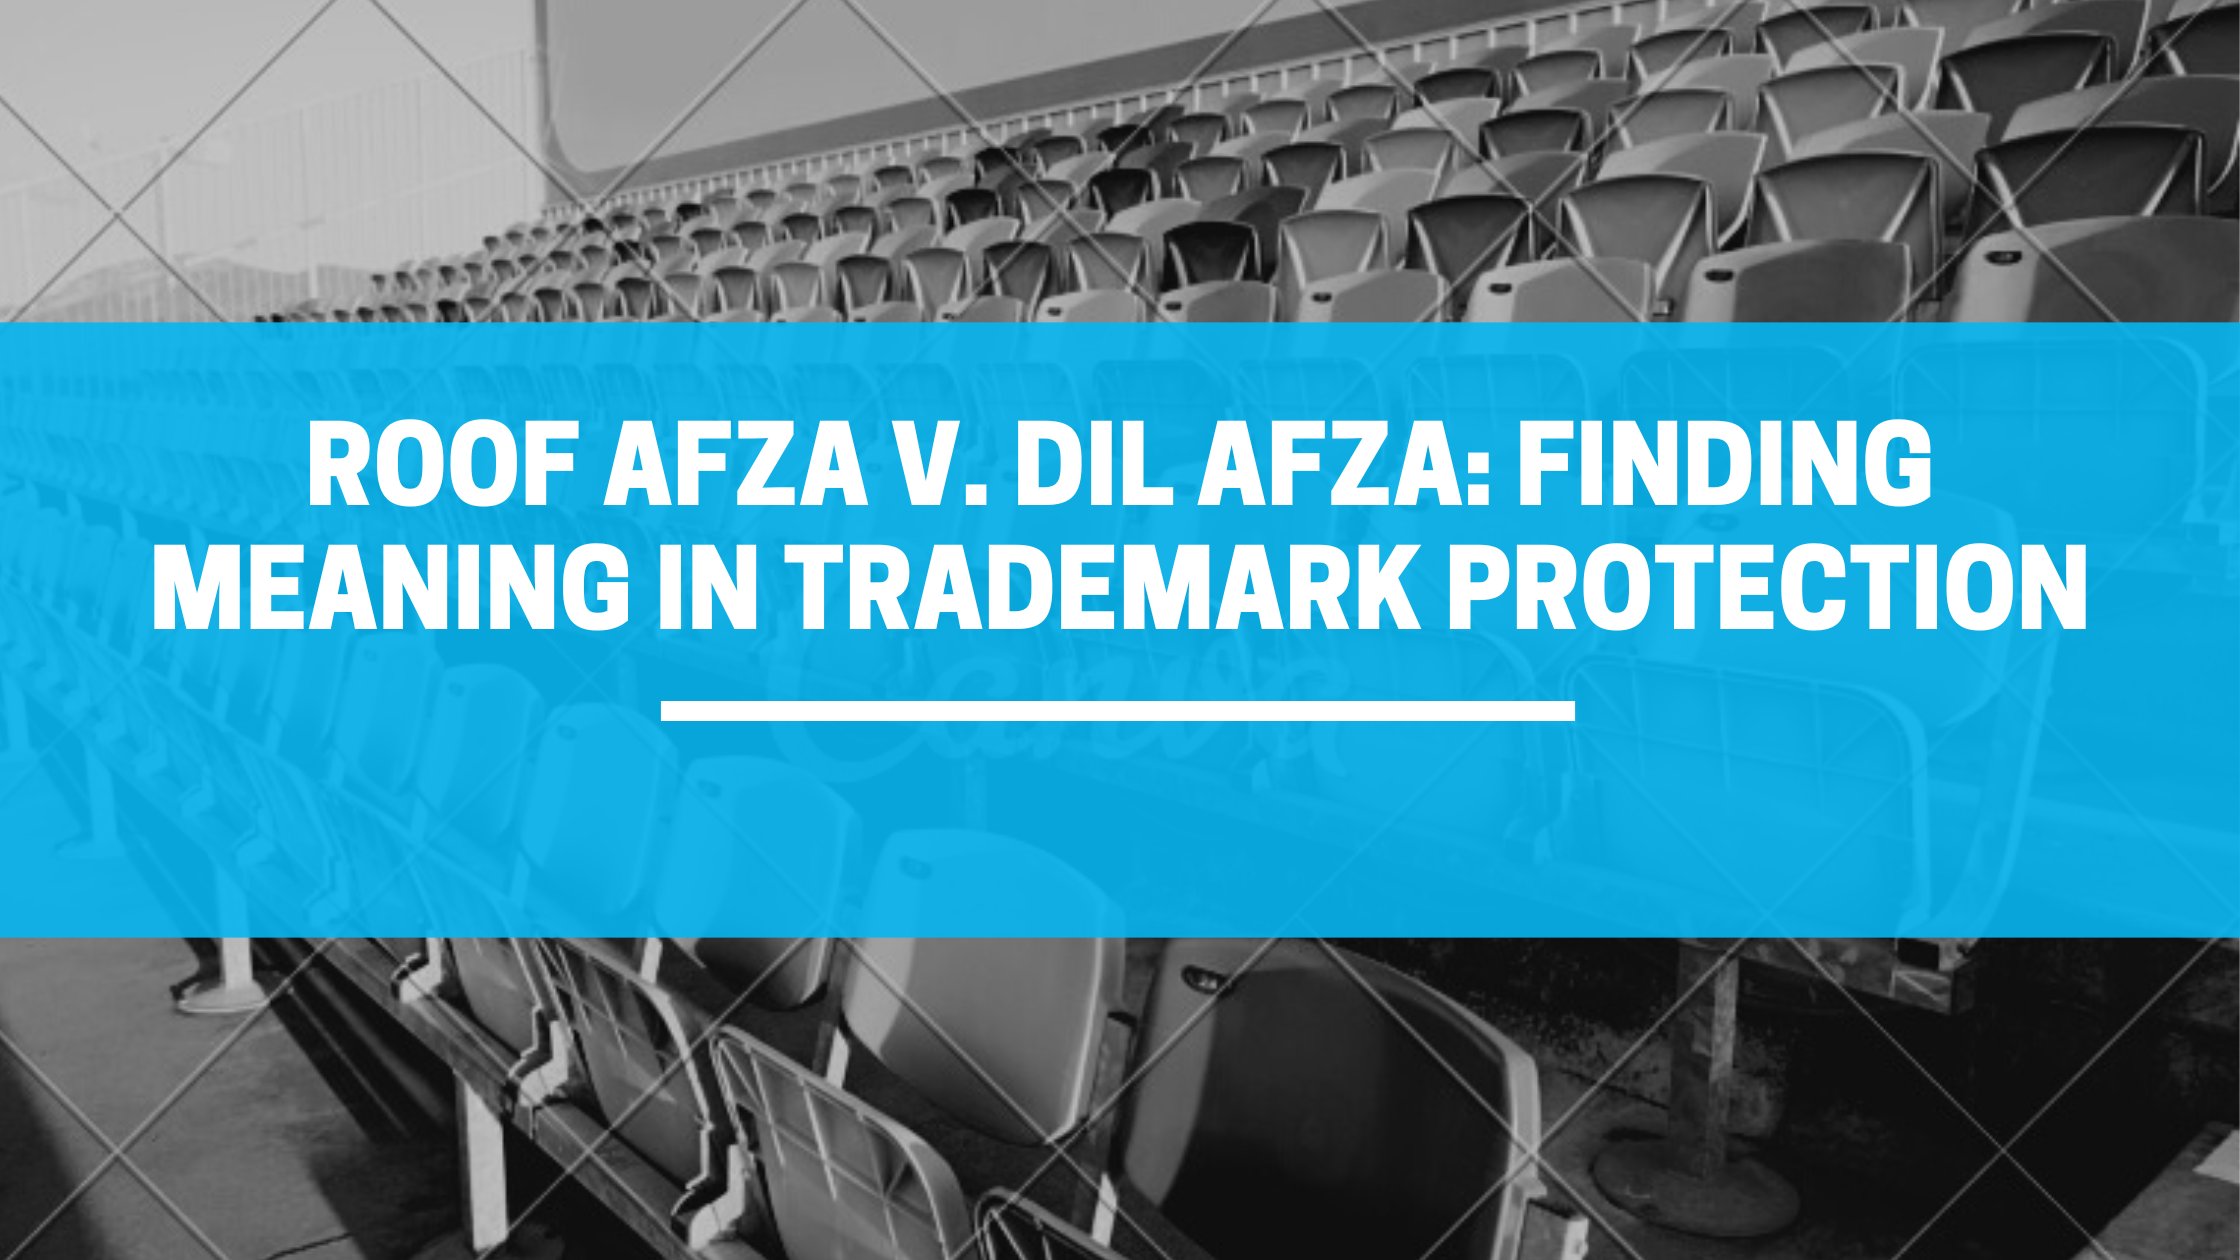 ROOF AFZA V. DIL AFZA: FINDING MEANING IN TRADEMARK PROTECTION